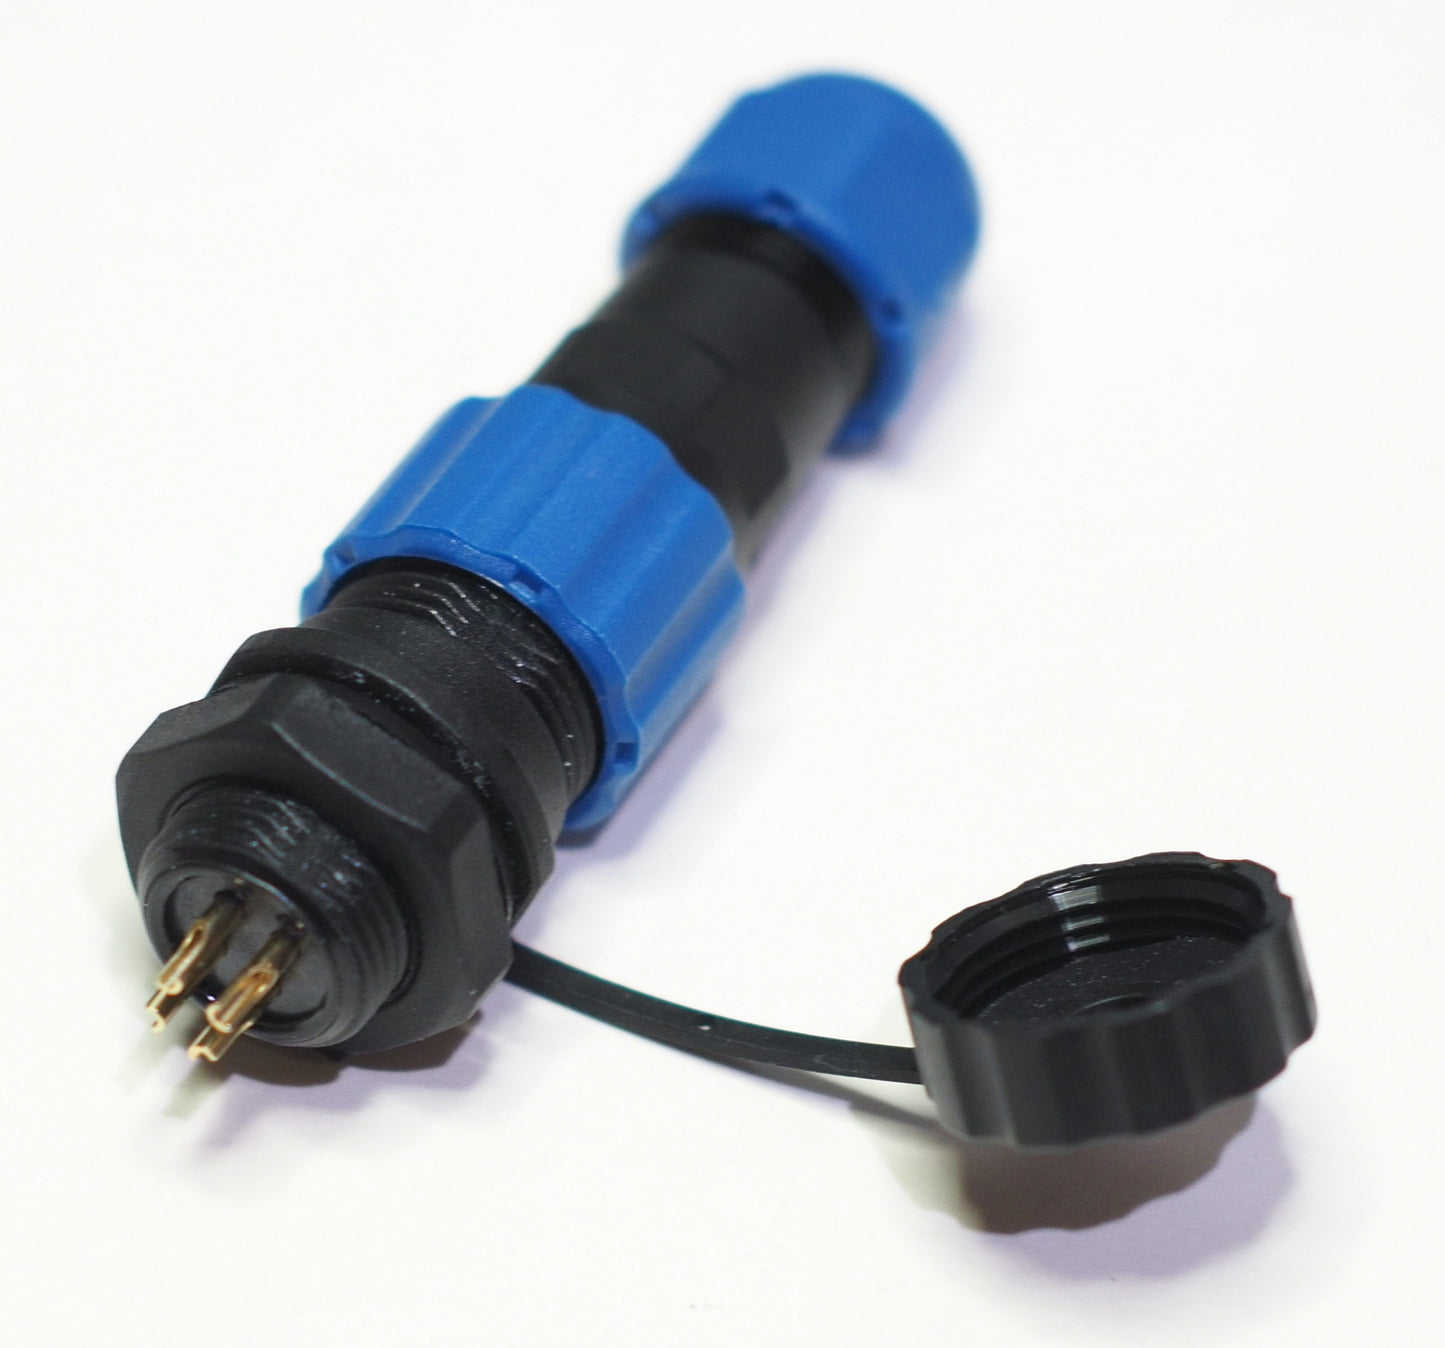 SP13 connector, 4-pin, male plug